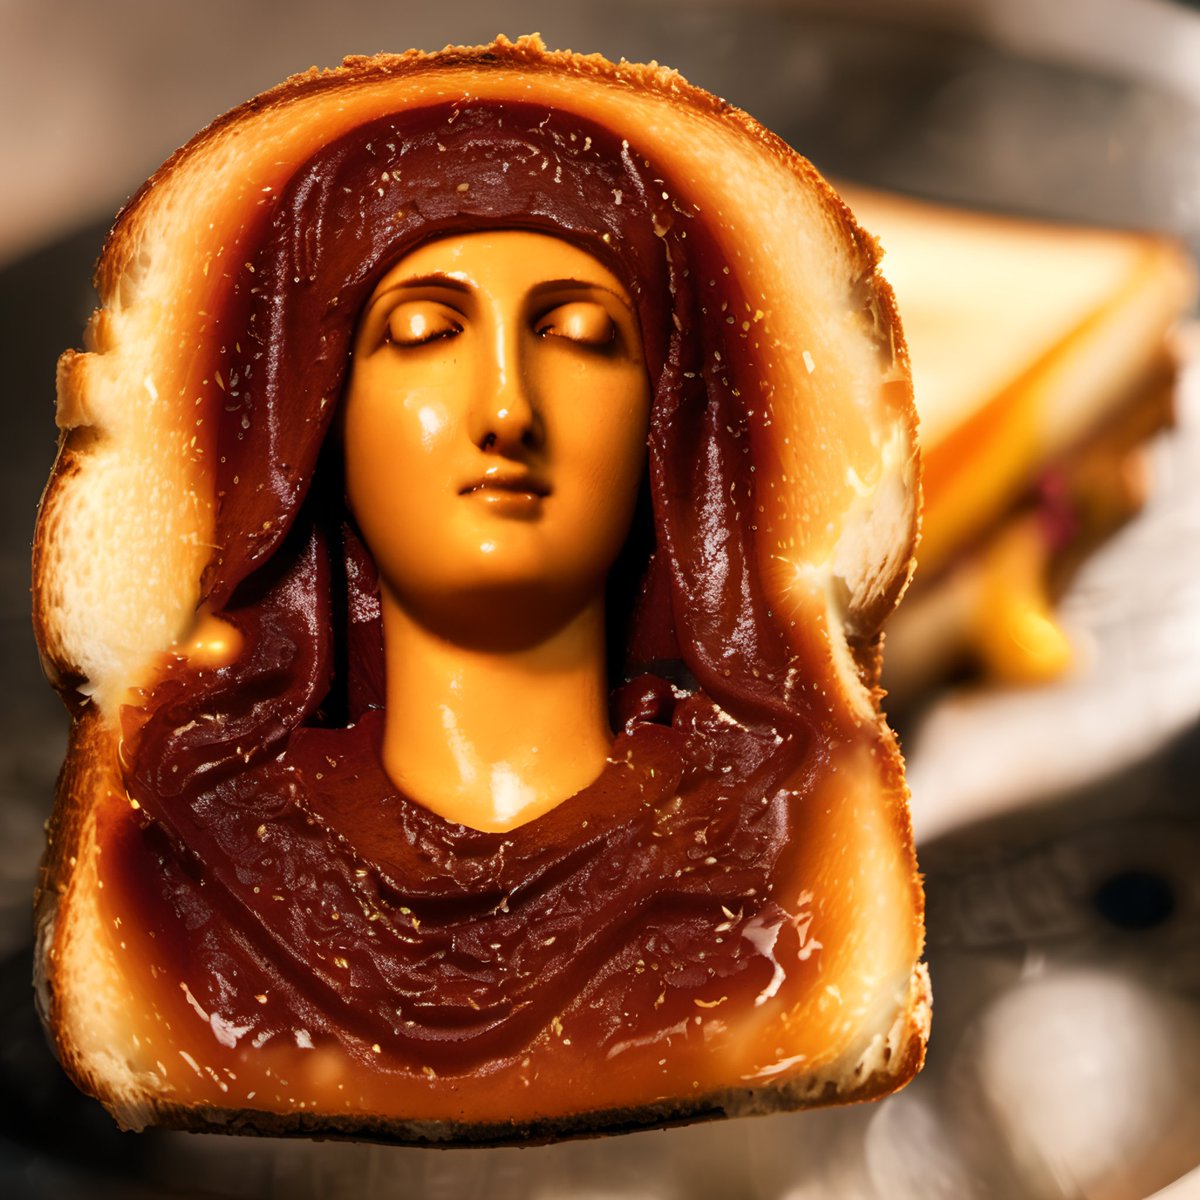 Melted Miracle #14 THE VIRGIN MARY 

SOLD! As of 8:22pm, Monday, November 22, 2004.
 
Diana Duyser's  'Virgin Mary' grilled cheese sandwich sold for $28,000 dollars at  auction on eBay to GoldenPalace dot com who's executives say they were  willing to spend 'as much as it took'…